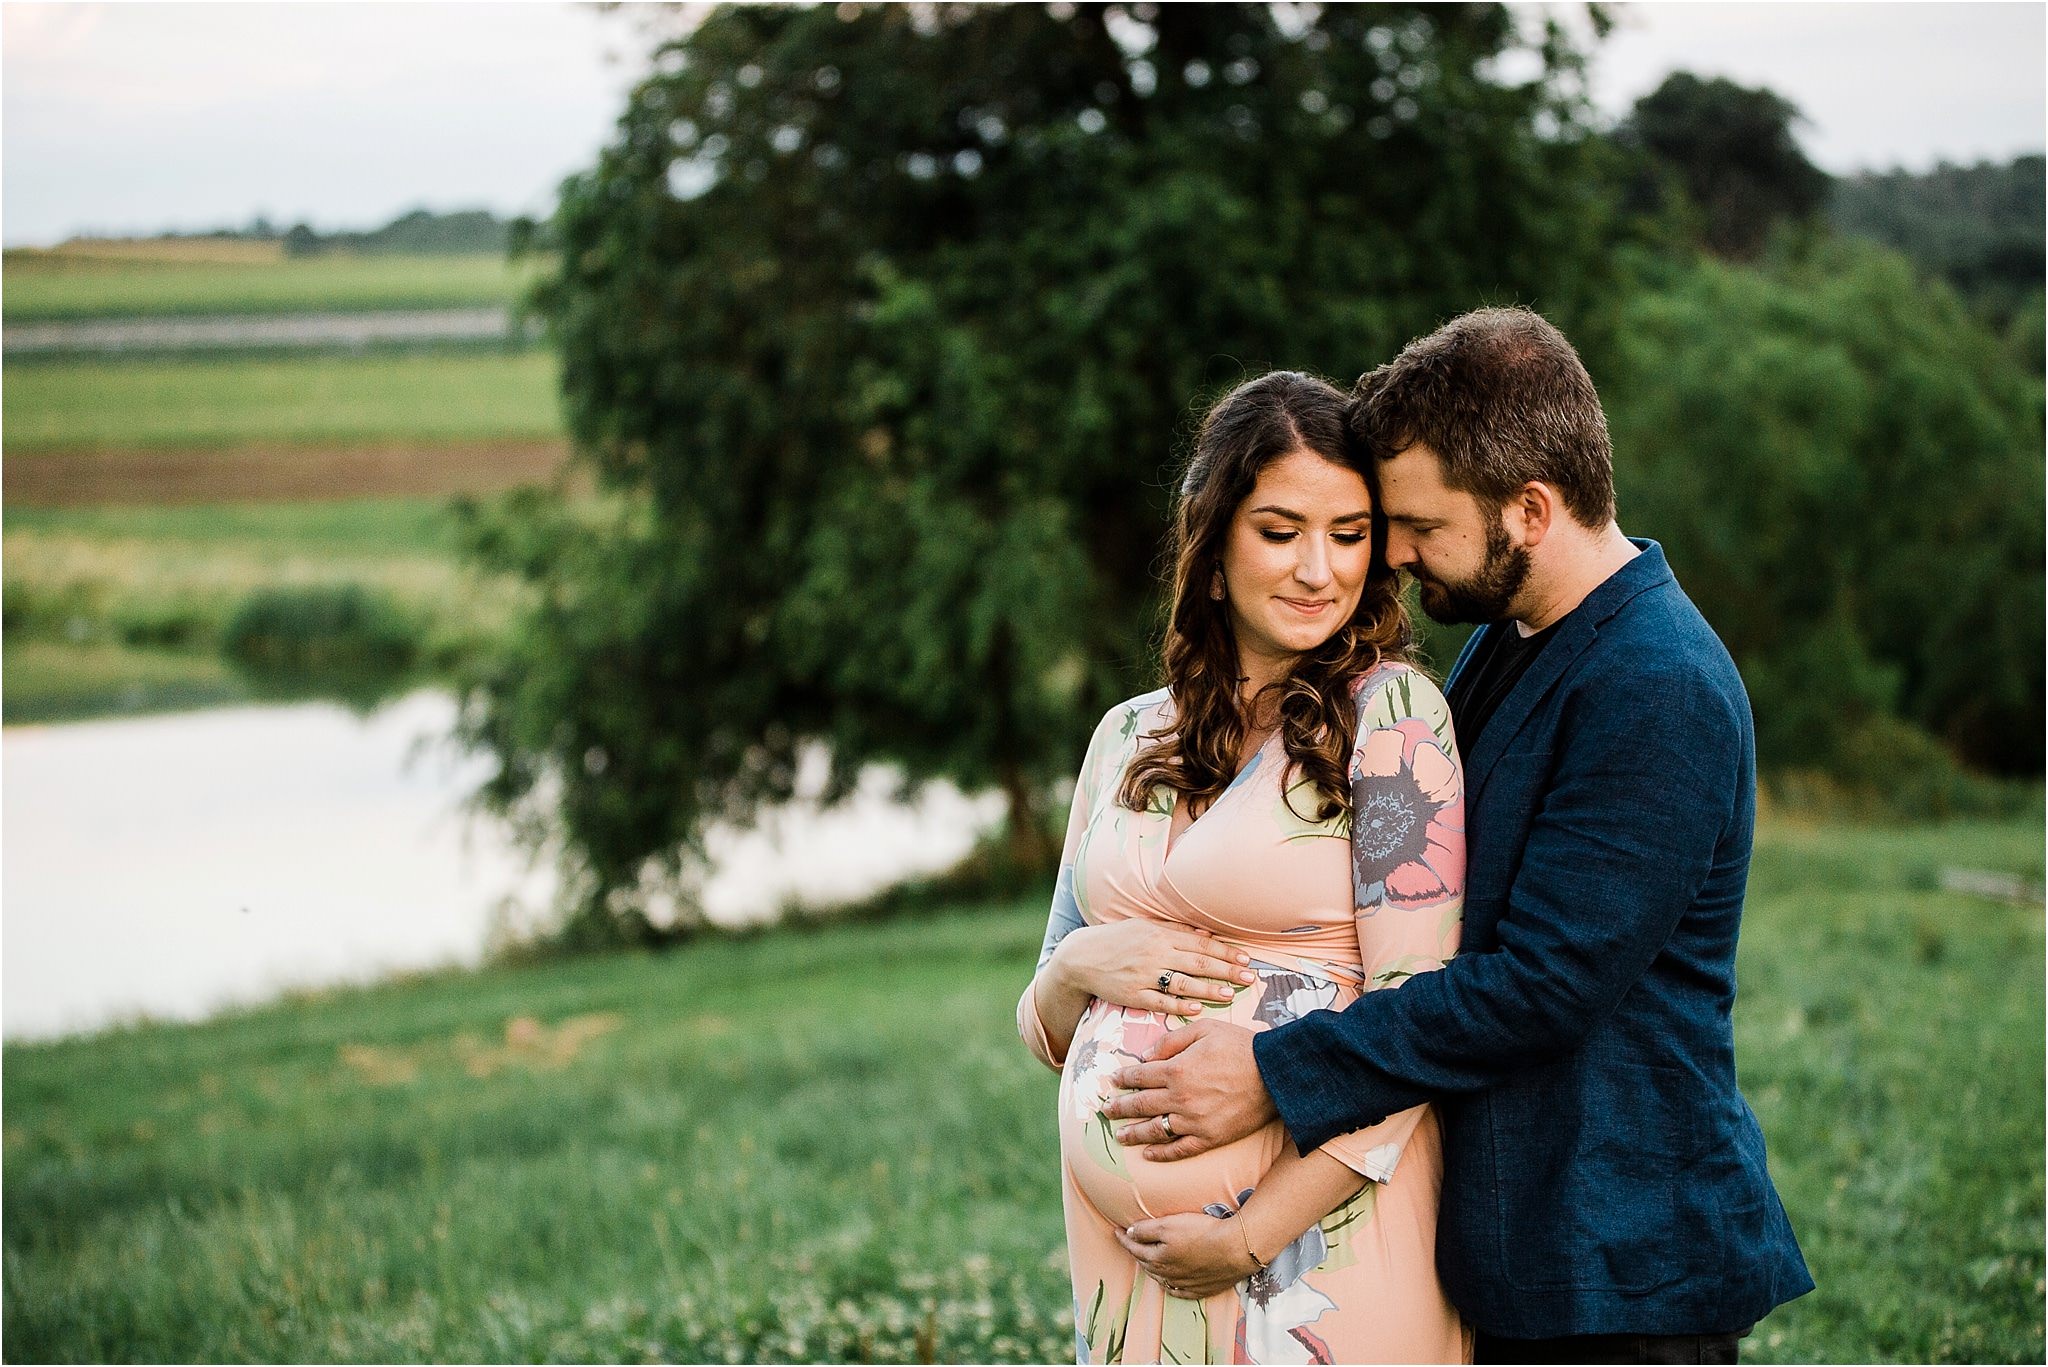 Husband and wife maternity photos at Pittsburgh farm